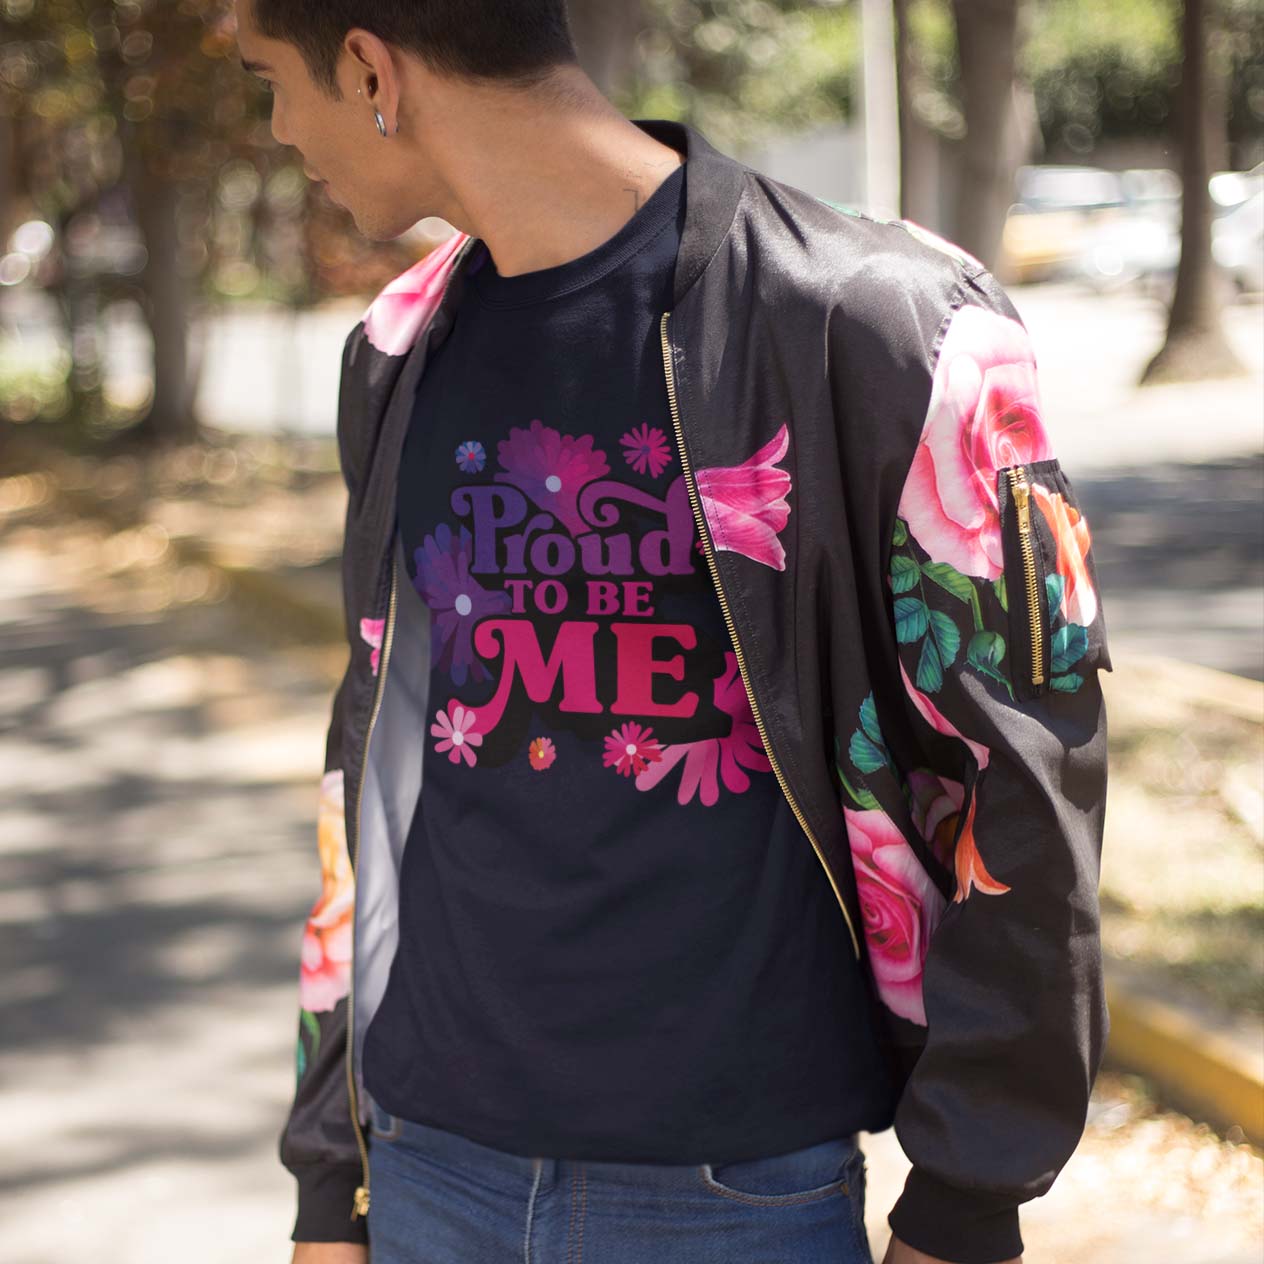 Awesome tee to express yourself! This tee for men has our PROUD TO BE ME meme visible at the front of the tee and is designed only for those who are proud to be themselves!